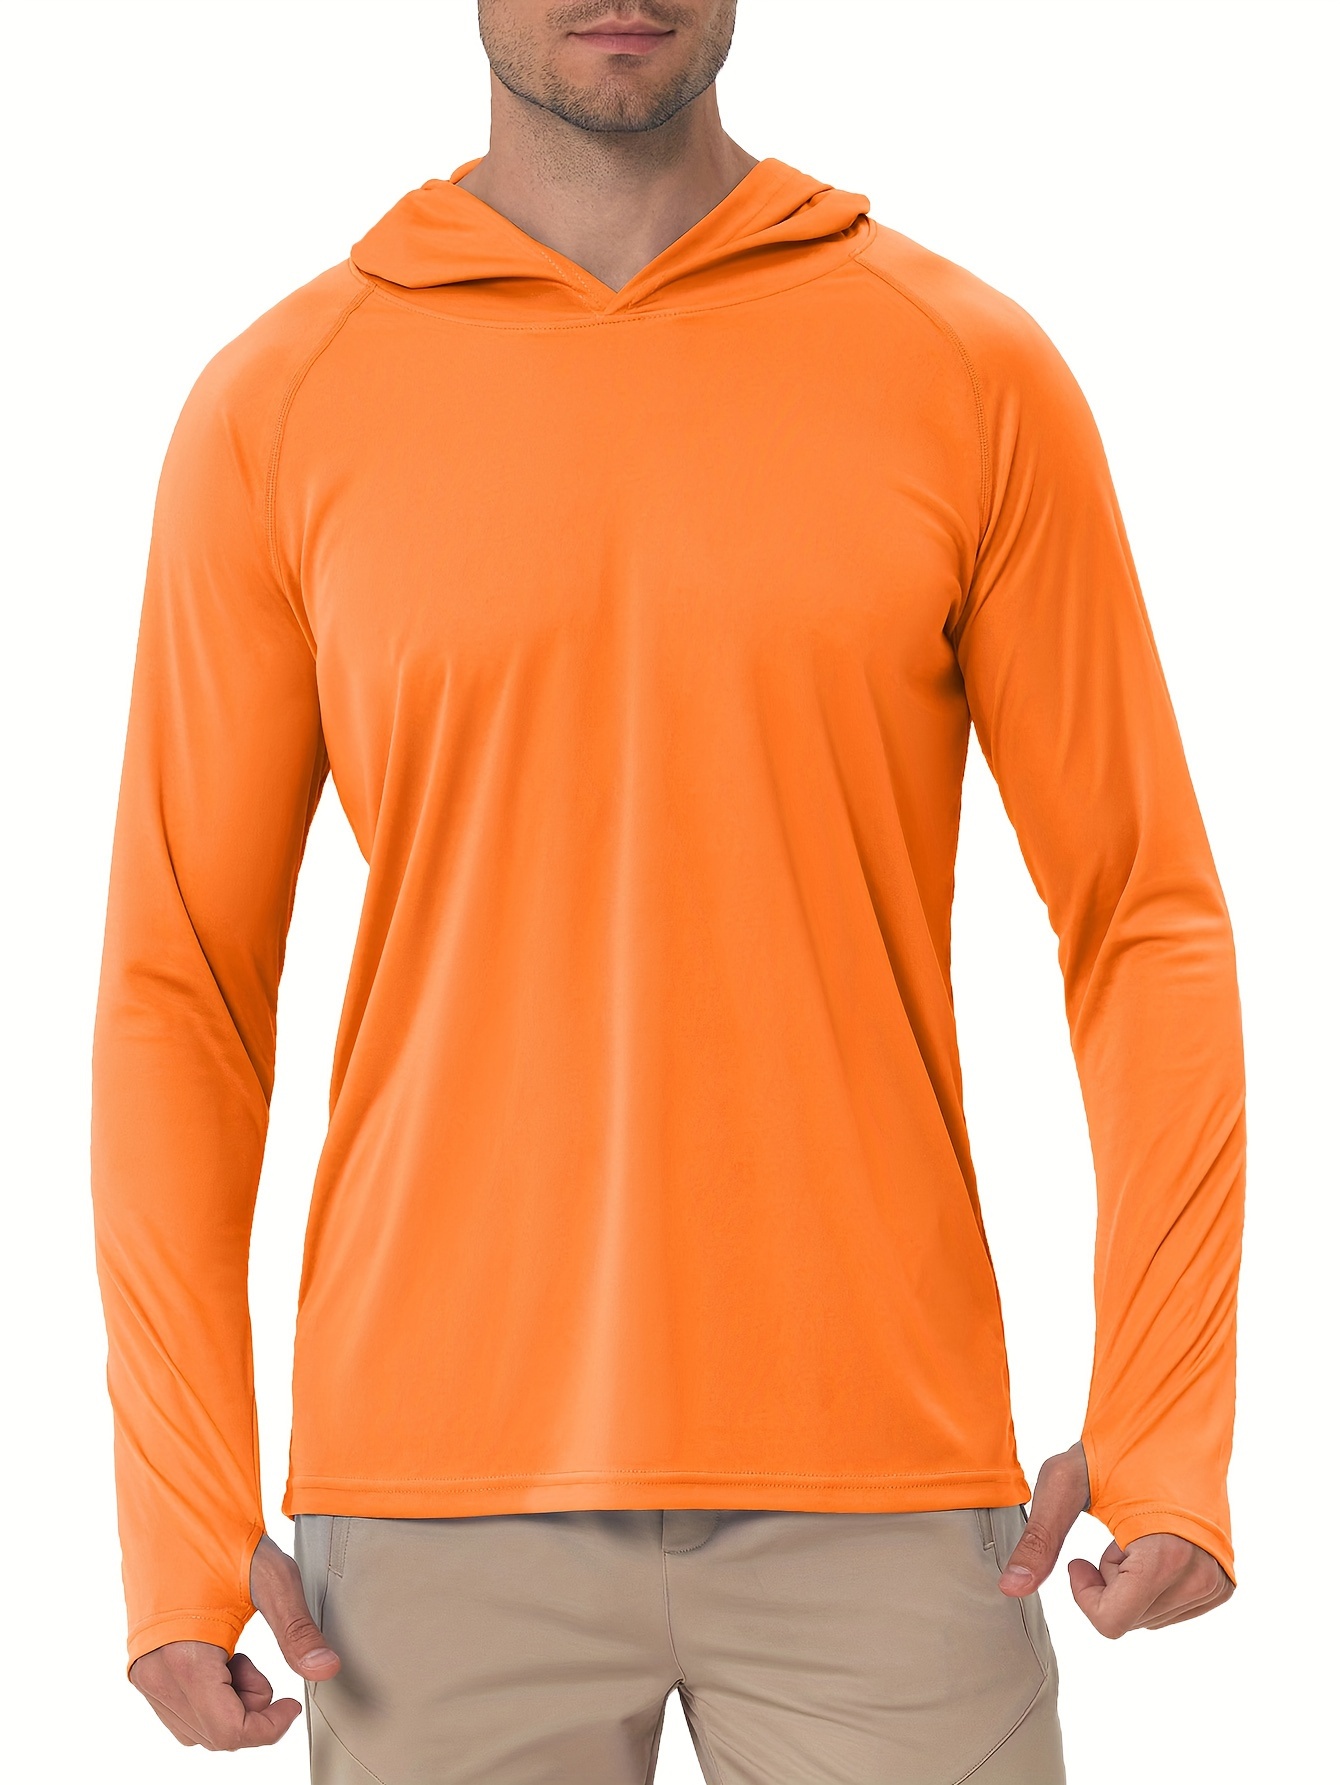 Men's Solid Color Upf 50+ Sun Protection Hoodies Long Sleeve